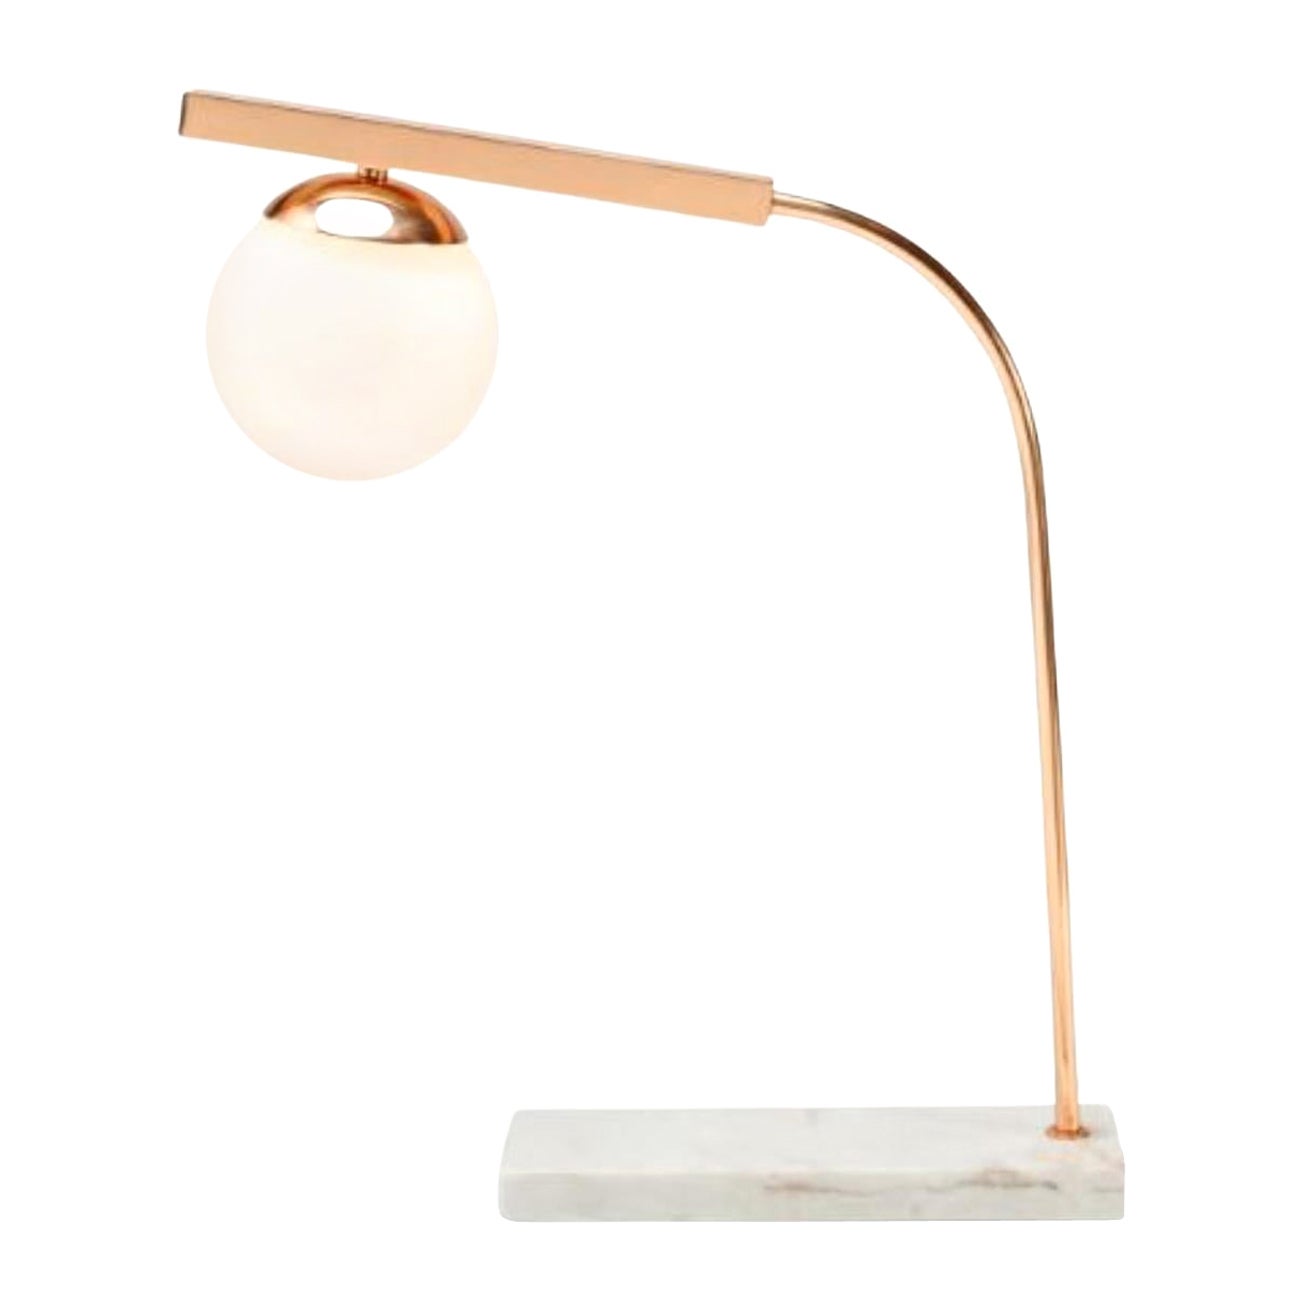 Copper Globe Table Lamp by Dooq